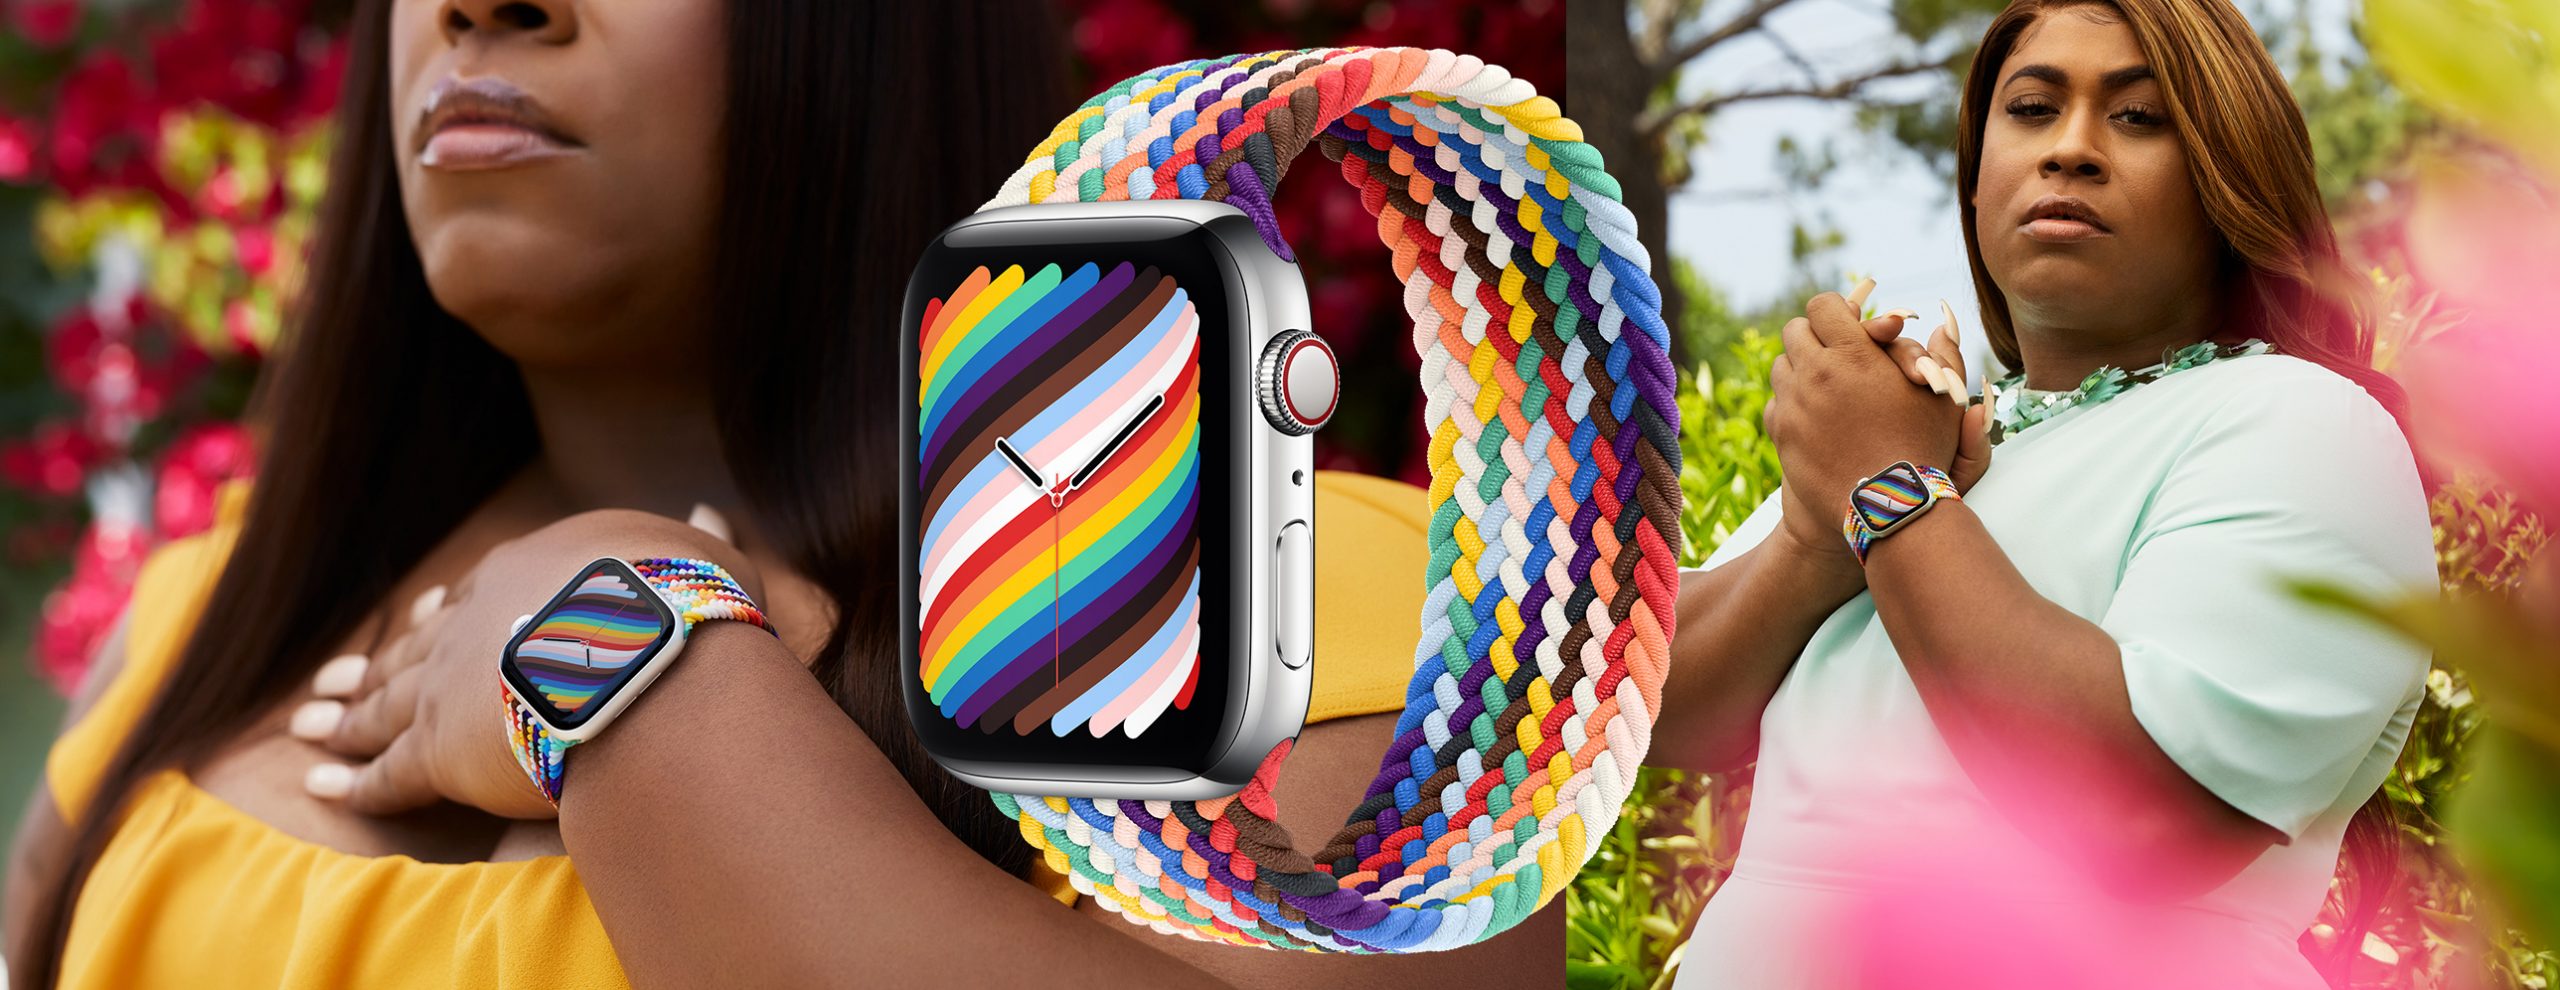 The 2021 Apple Watch Pride Edition bands include a new Braided Solo